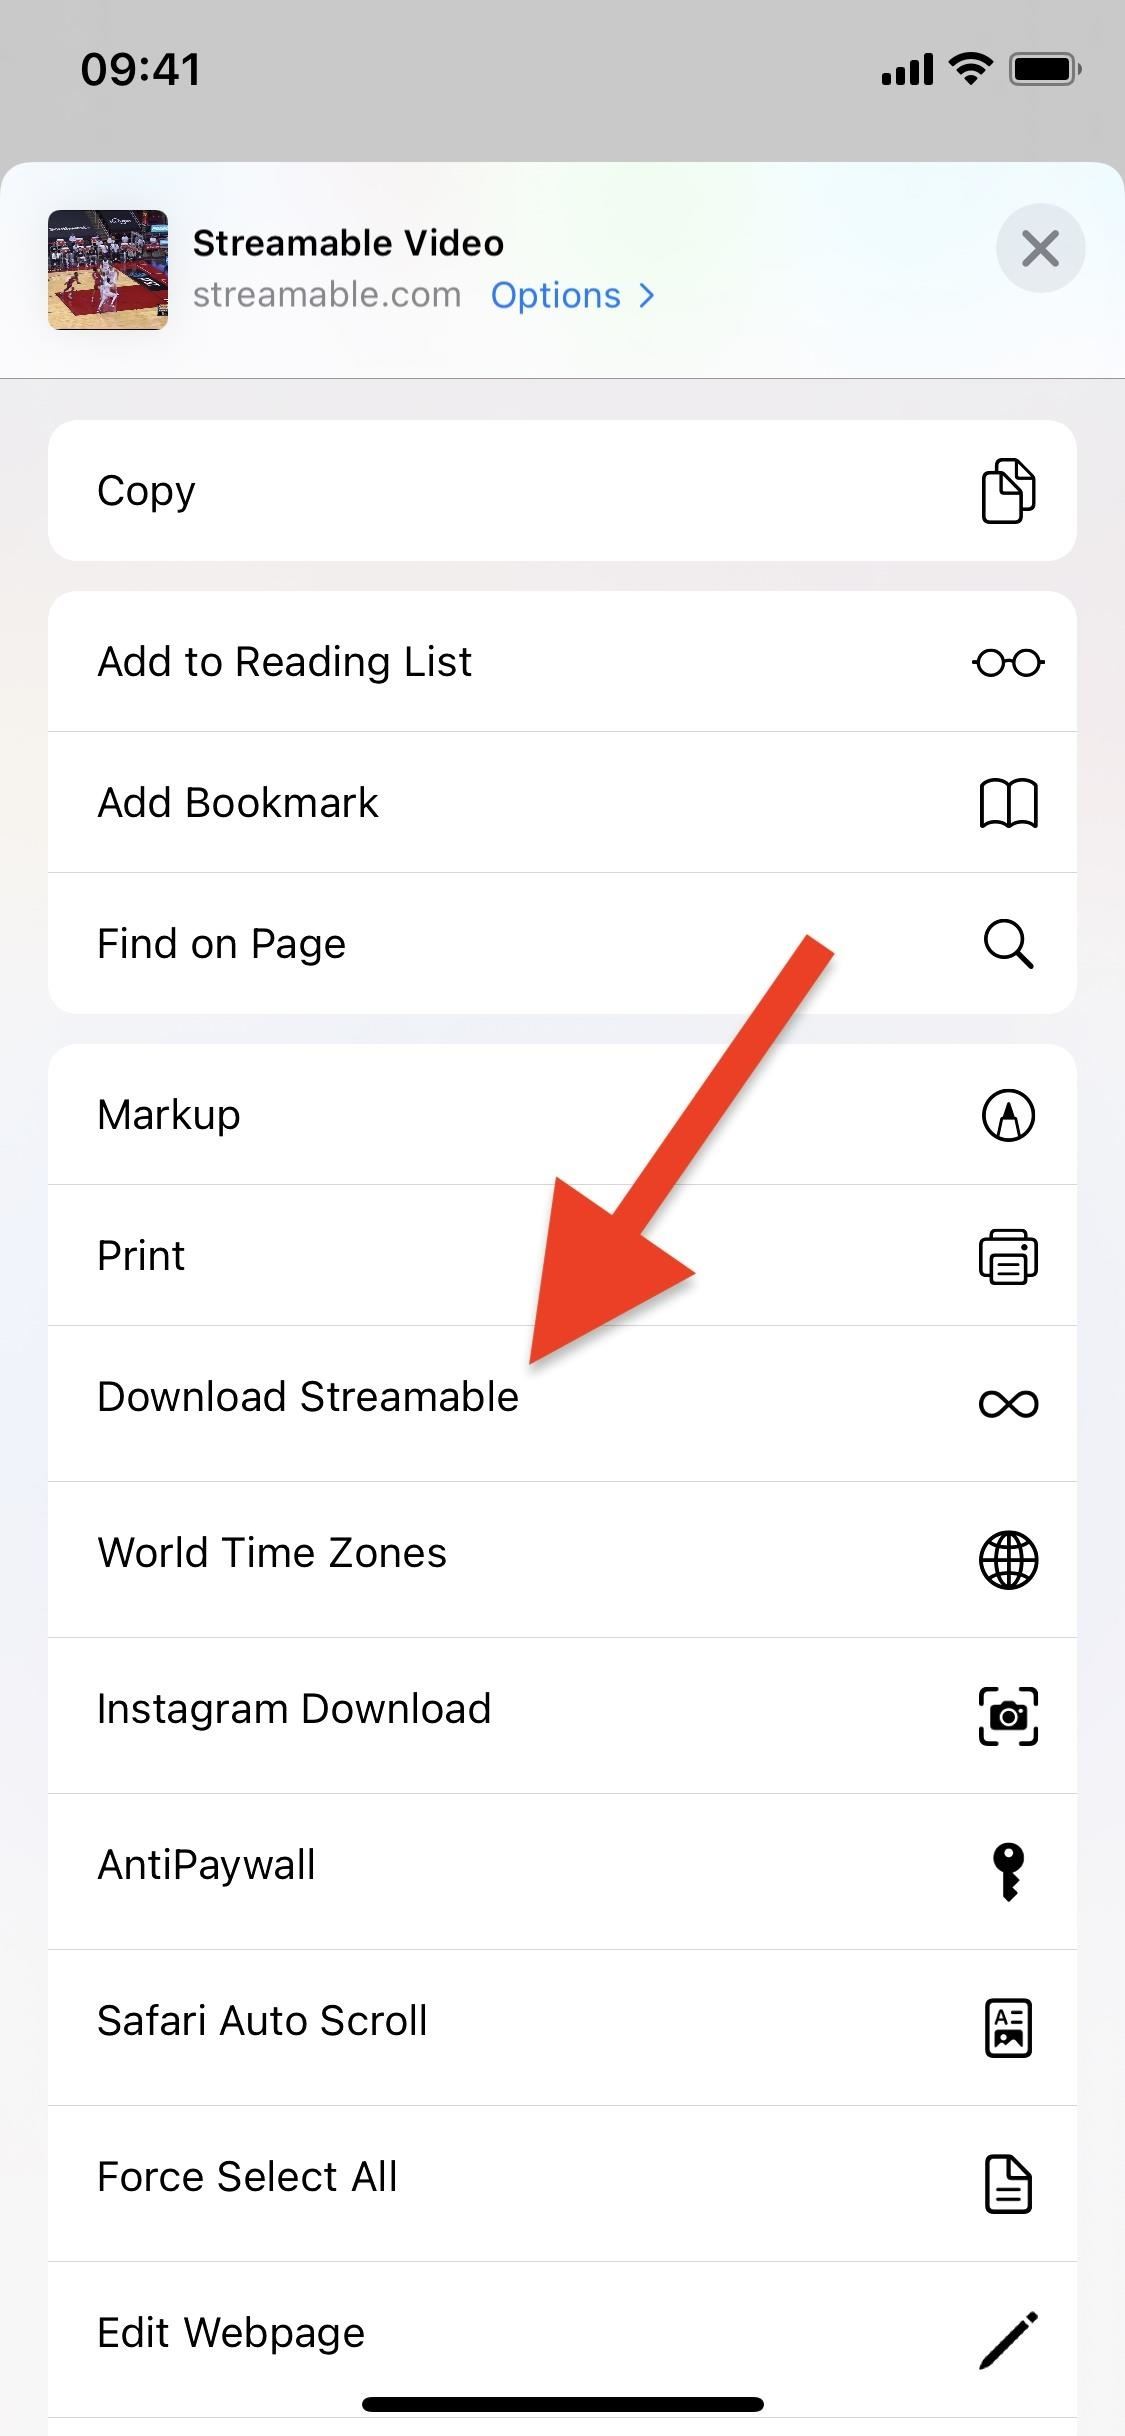 How to Quickly Download Streamable Videos on Your iPhone Before They Disappear Online